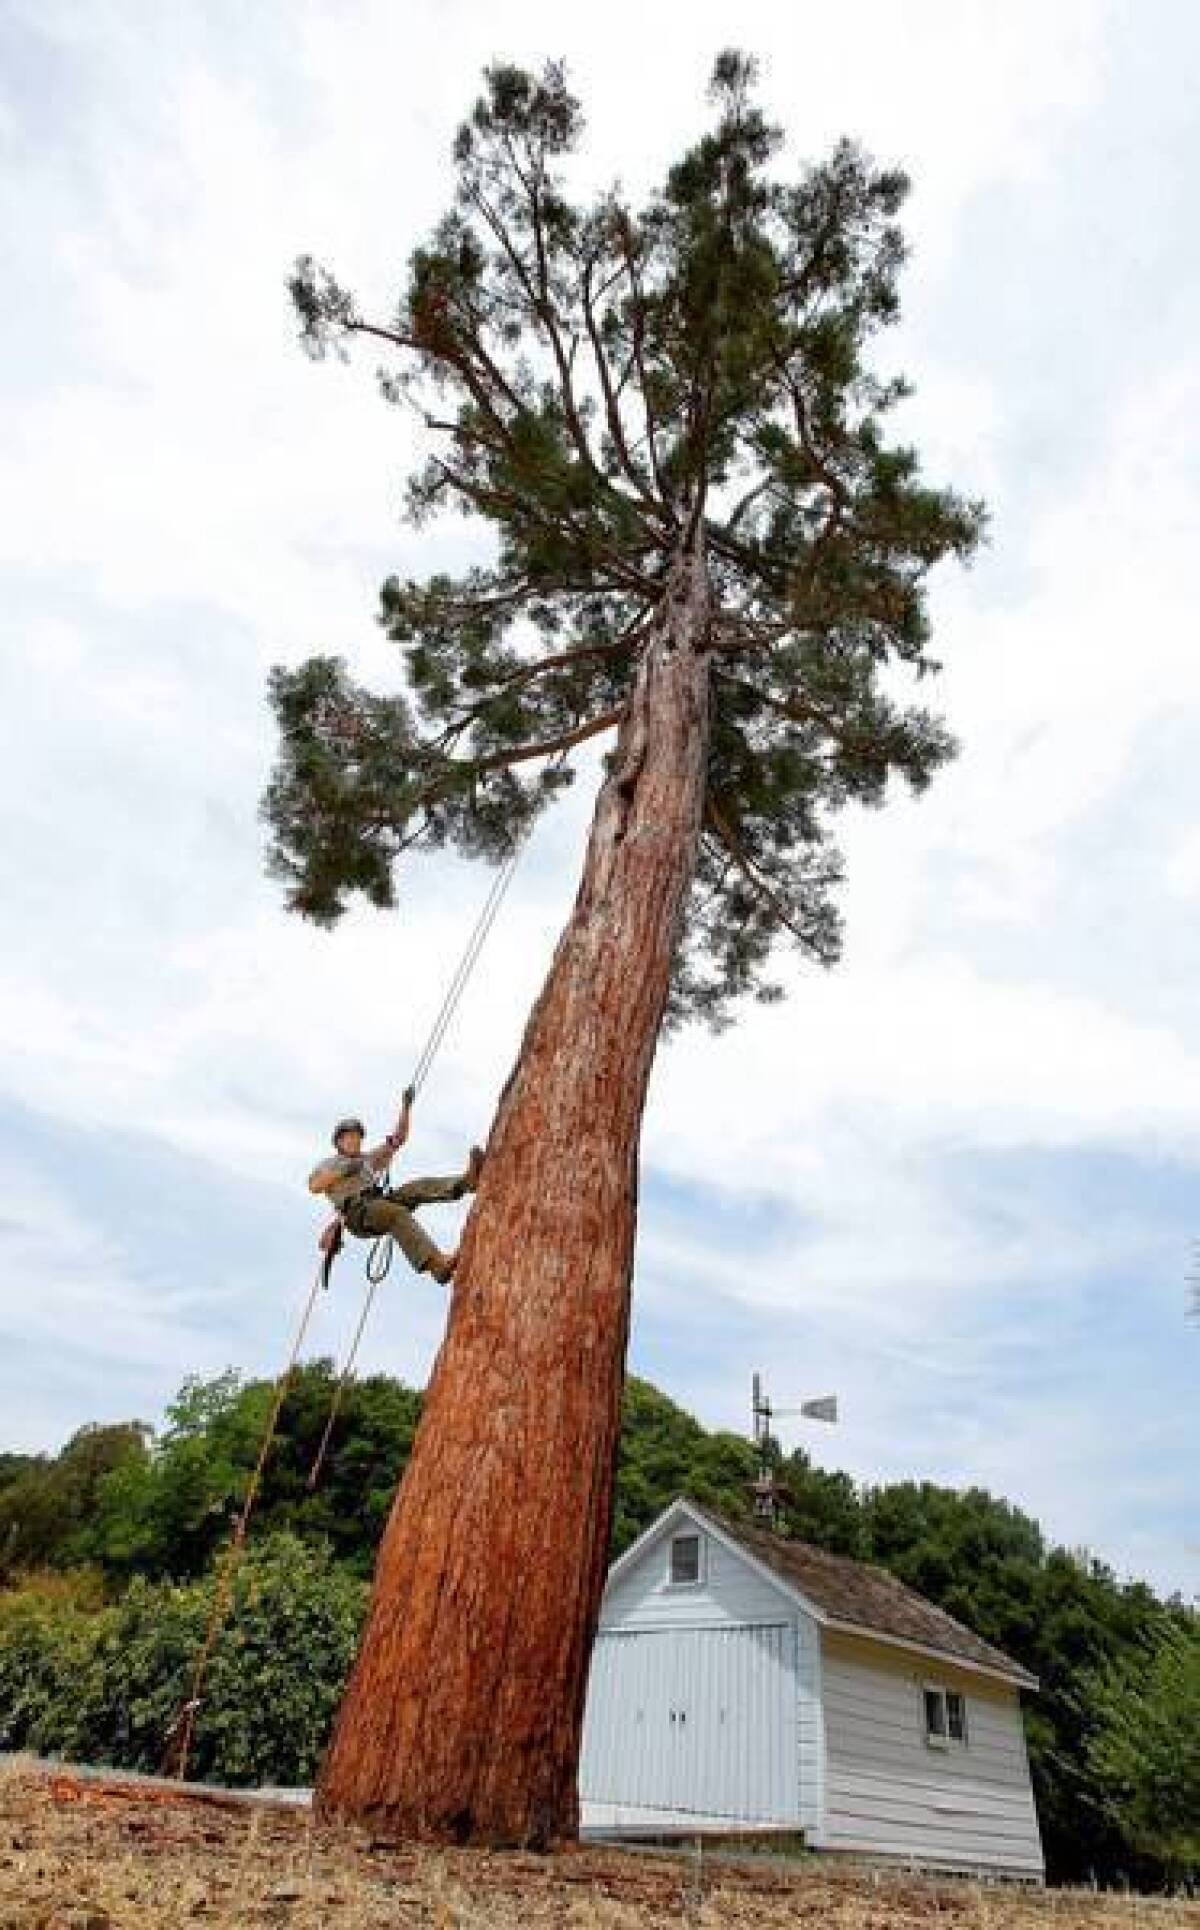 Keith Park, a horticulturist with the National Park Service, is photographed on the 70-foot-tall sequoia at the John Muir National Historic Site in Martinez, Calif. Muir brought back the tree as a seedling from the Sierra Nevada 130 years ago. The sequoia is dying of an airborne fungus, and Park is trying to keep at least part of the ailing conifer alive through cloning.